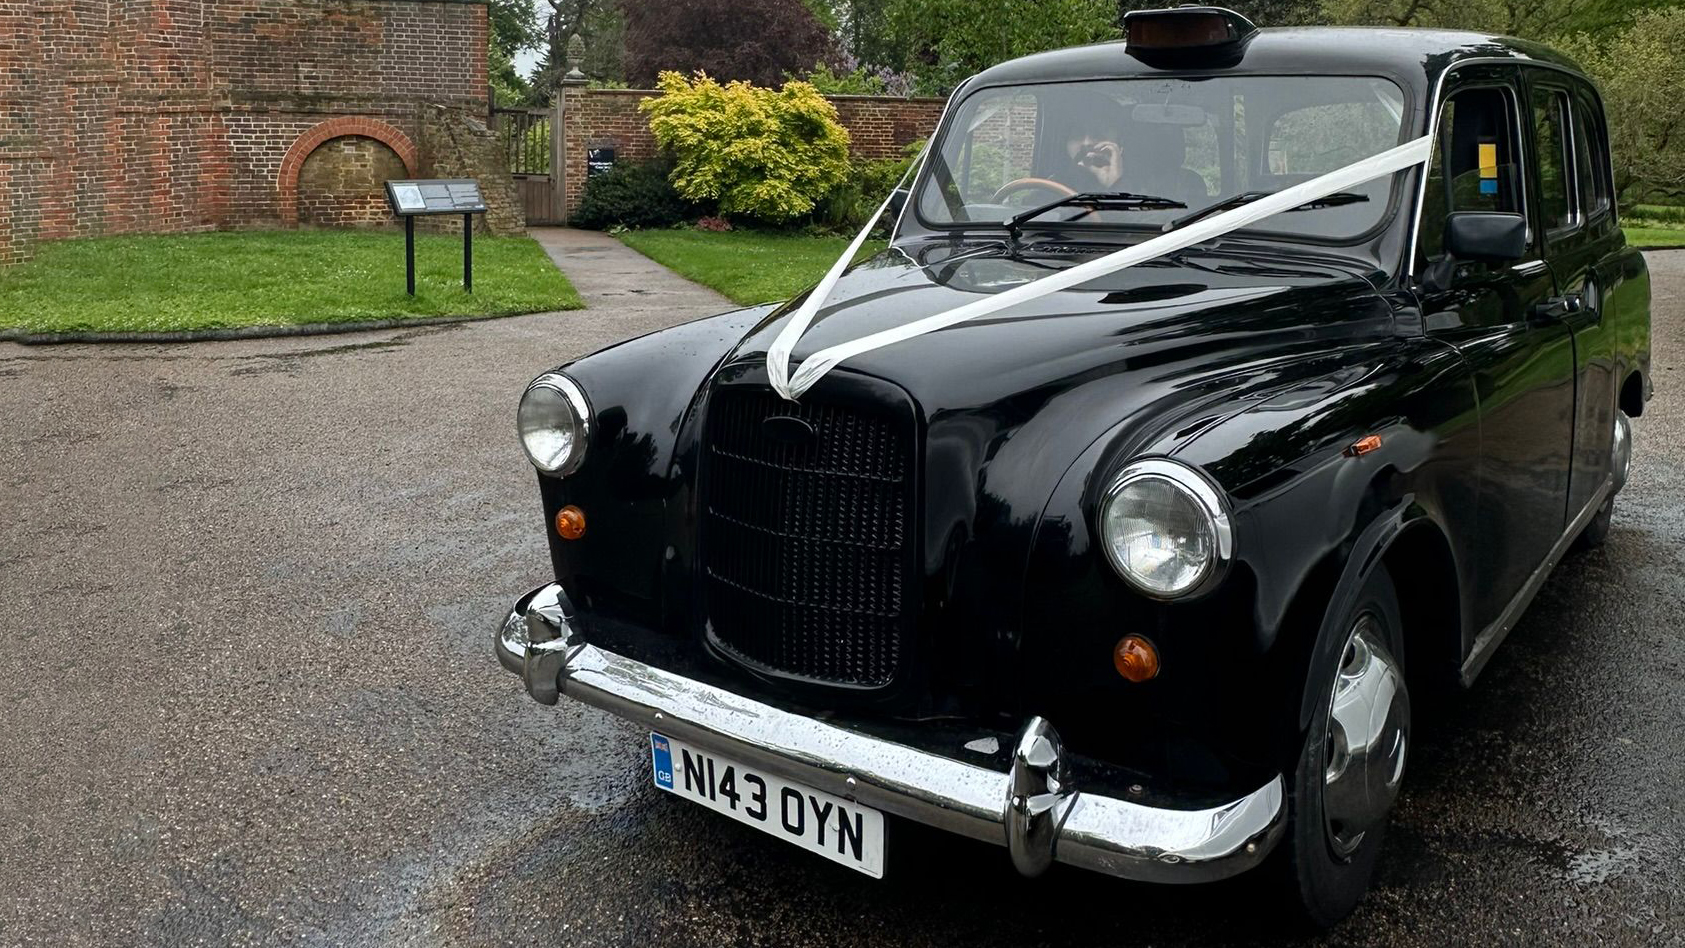 Front view of an iconic Black London Taxi Cab